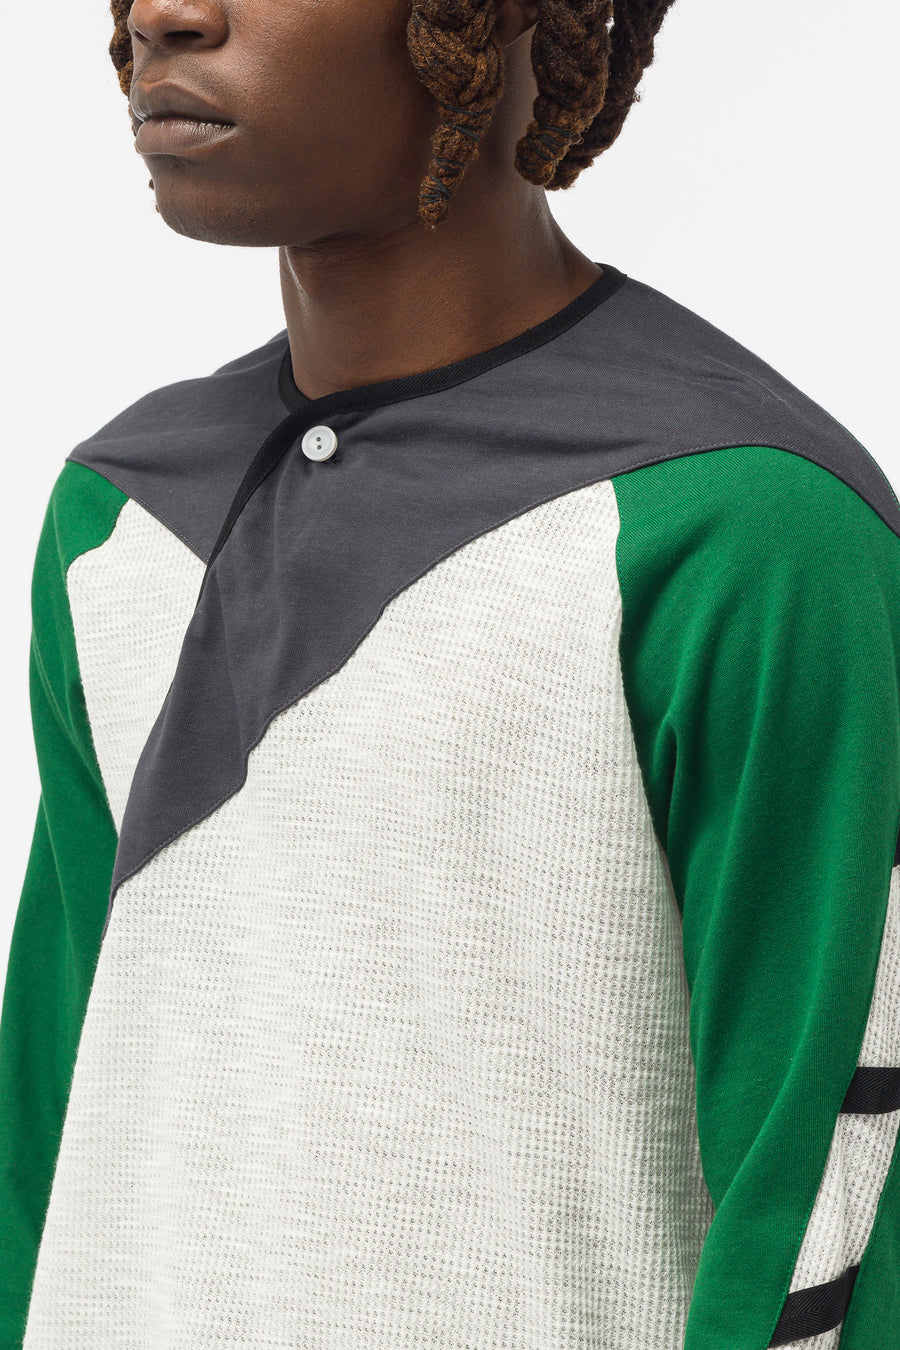 Remus Top in White/Grey/Green